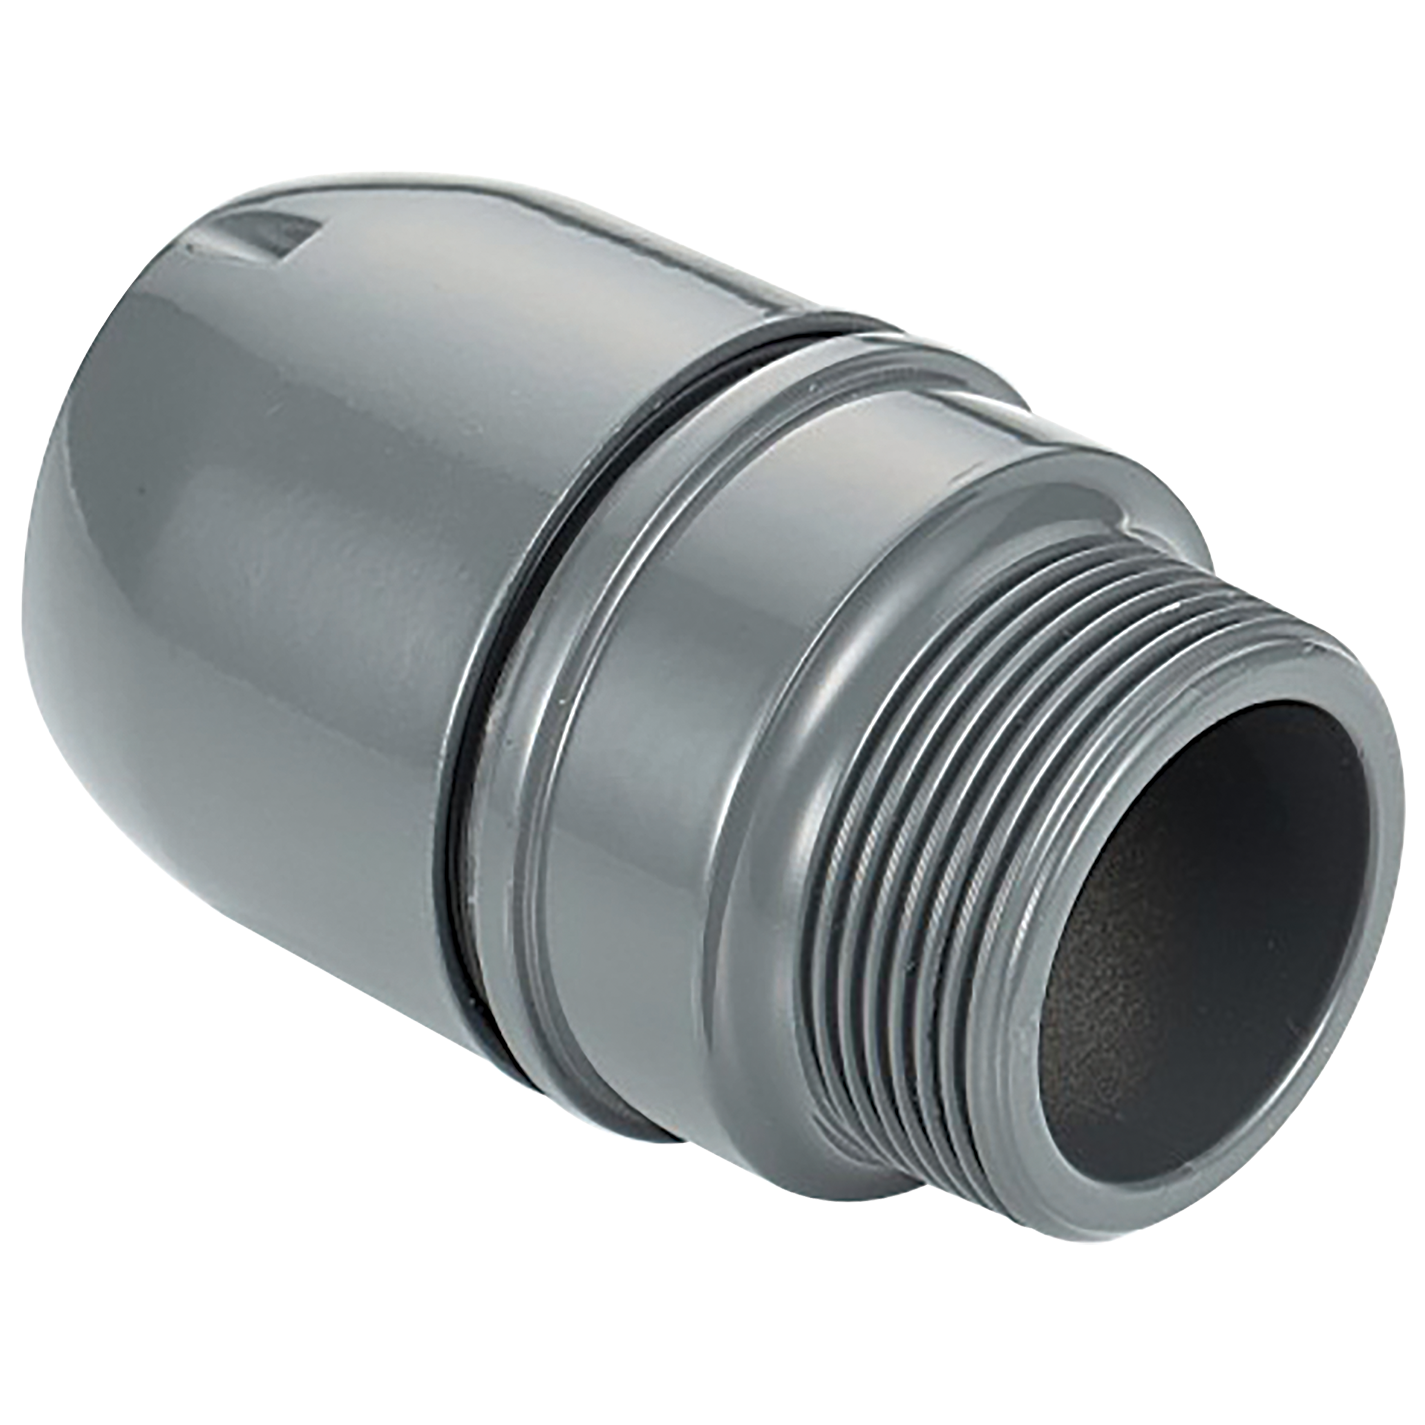 20MMX3/4" MALE AIRPIPE CONNECTOR